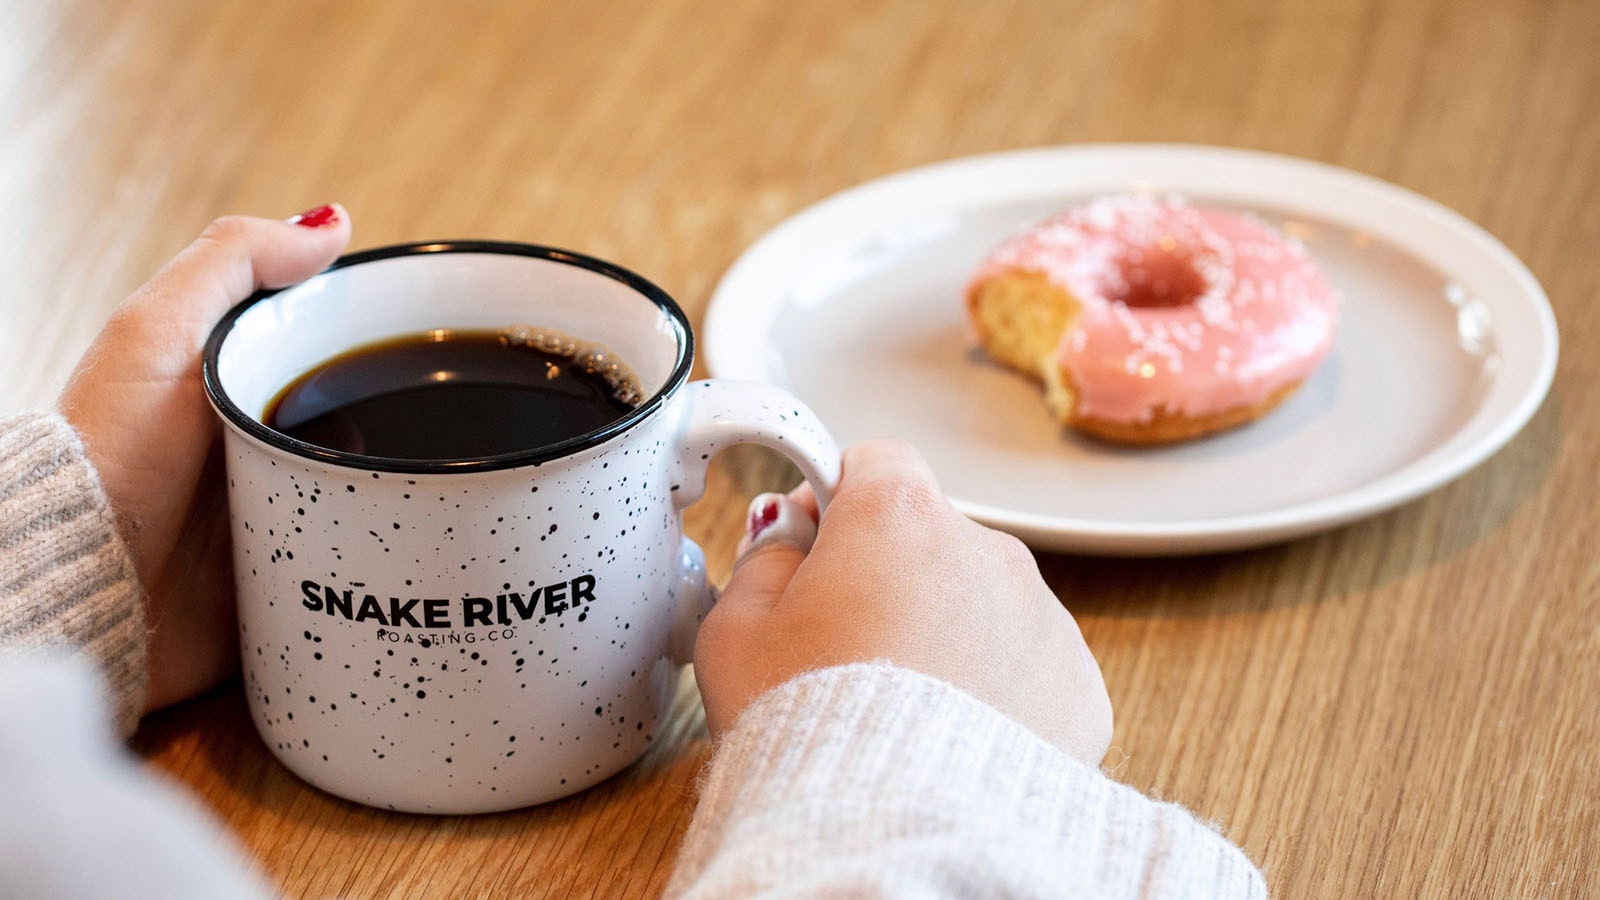 A donut is a perfect treat to pair with a cup of Snake River coffee.